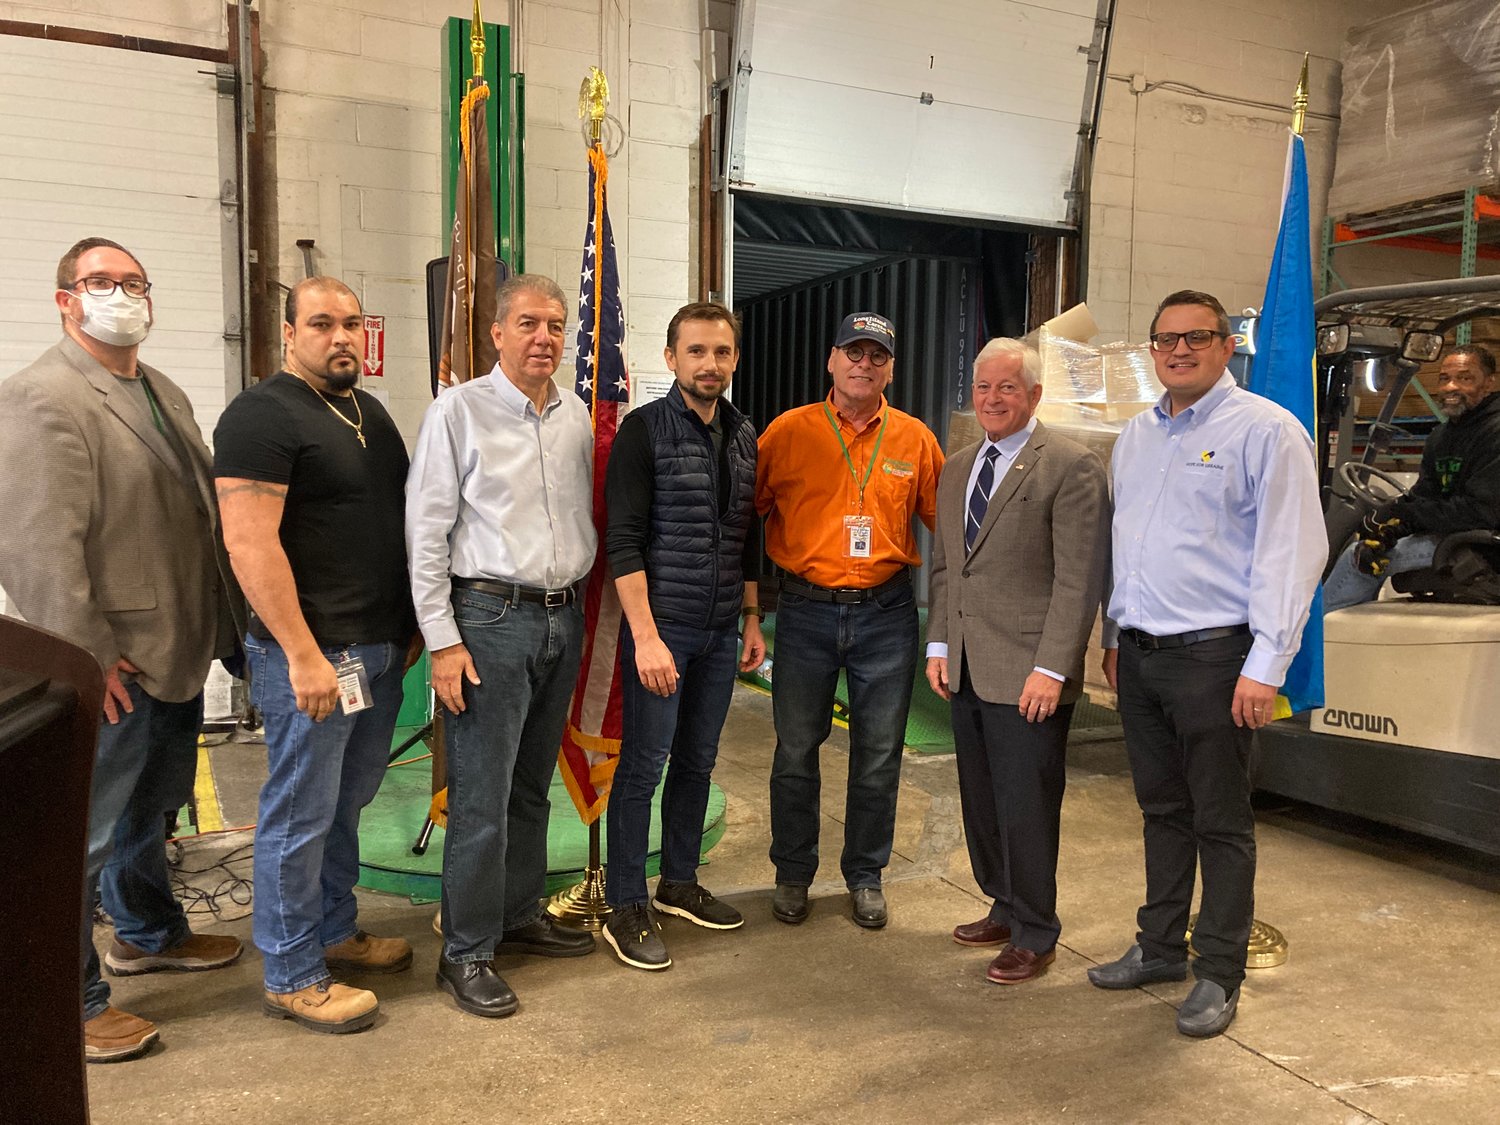 State Assemblyman Chuck Lavine, second from right, joined representatives of Long Island Cares, Ukrainian Americans of Long Island and Hope for Ukraine to send the aid shipments to Lviv.